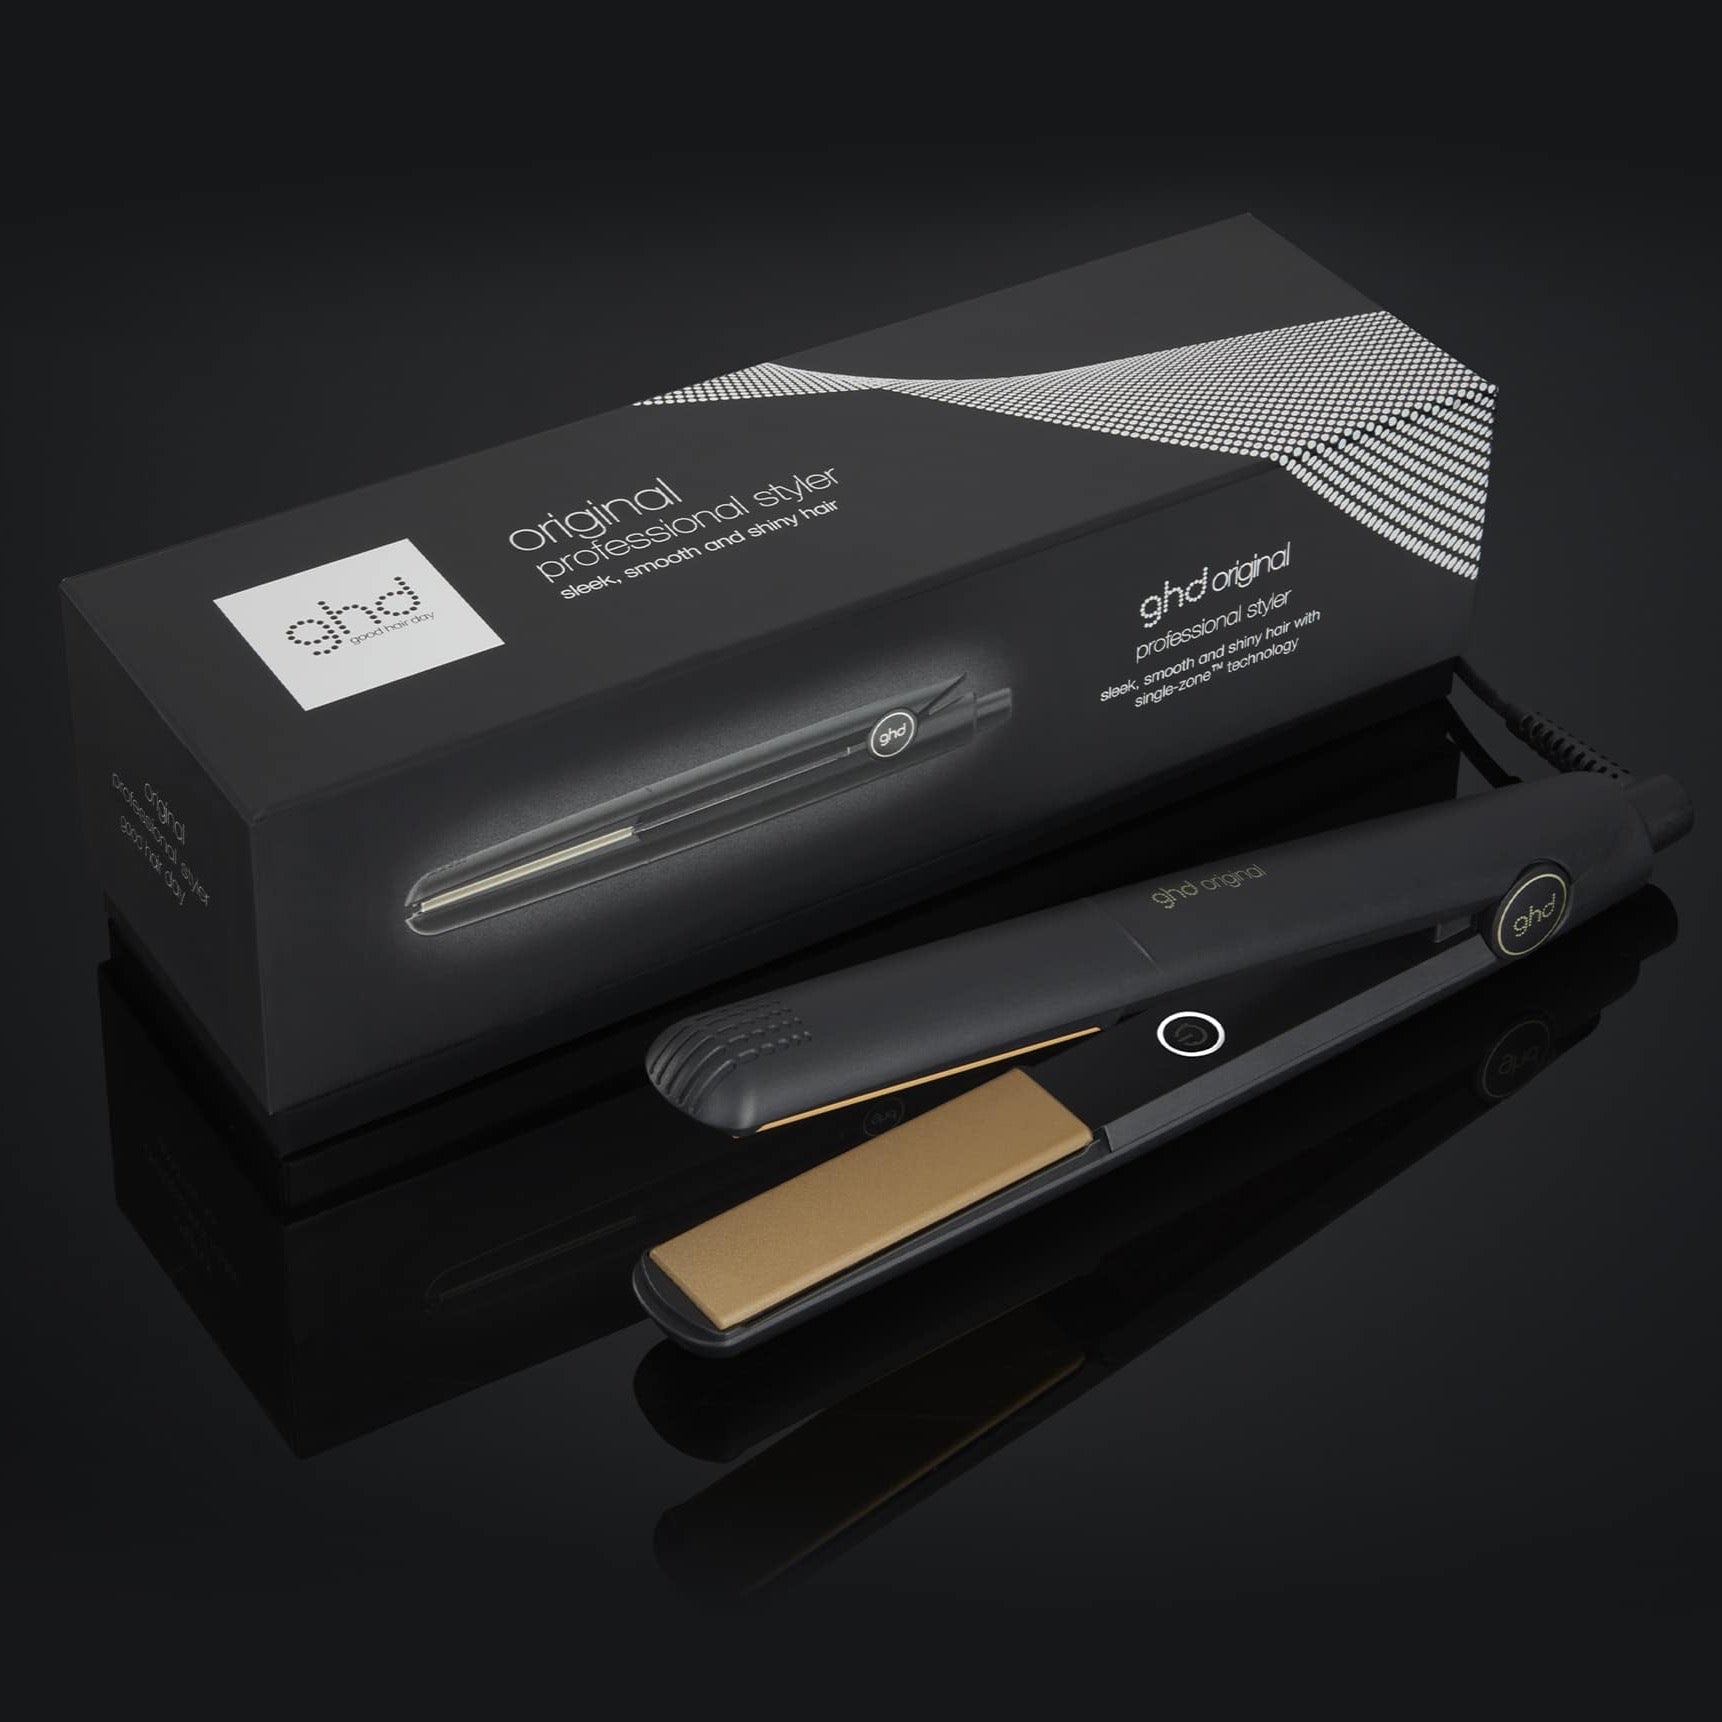 GHD Original Styler, with packaging